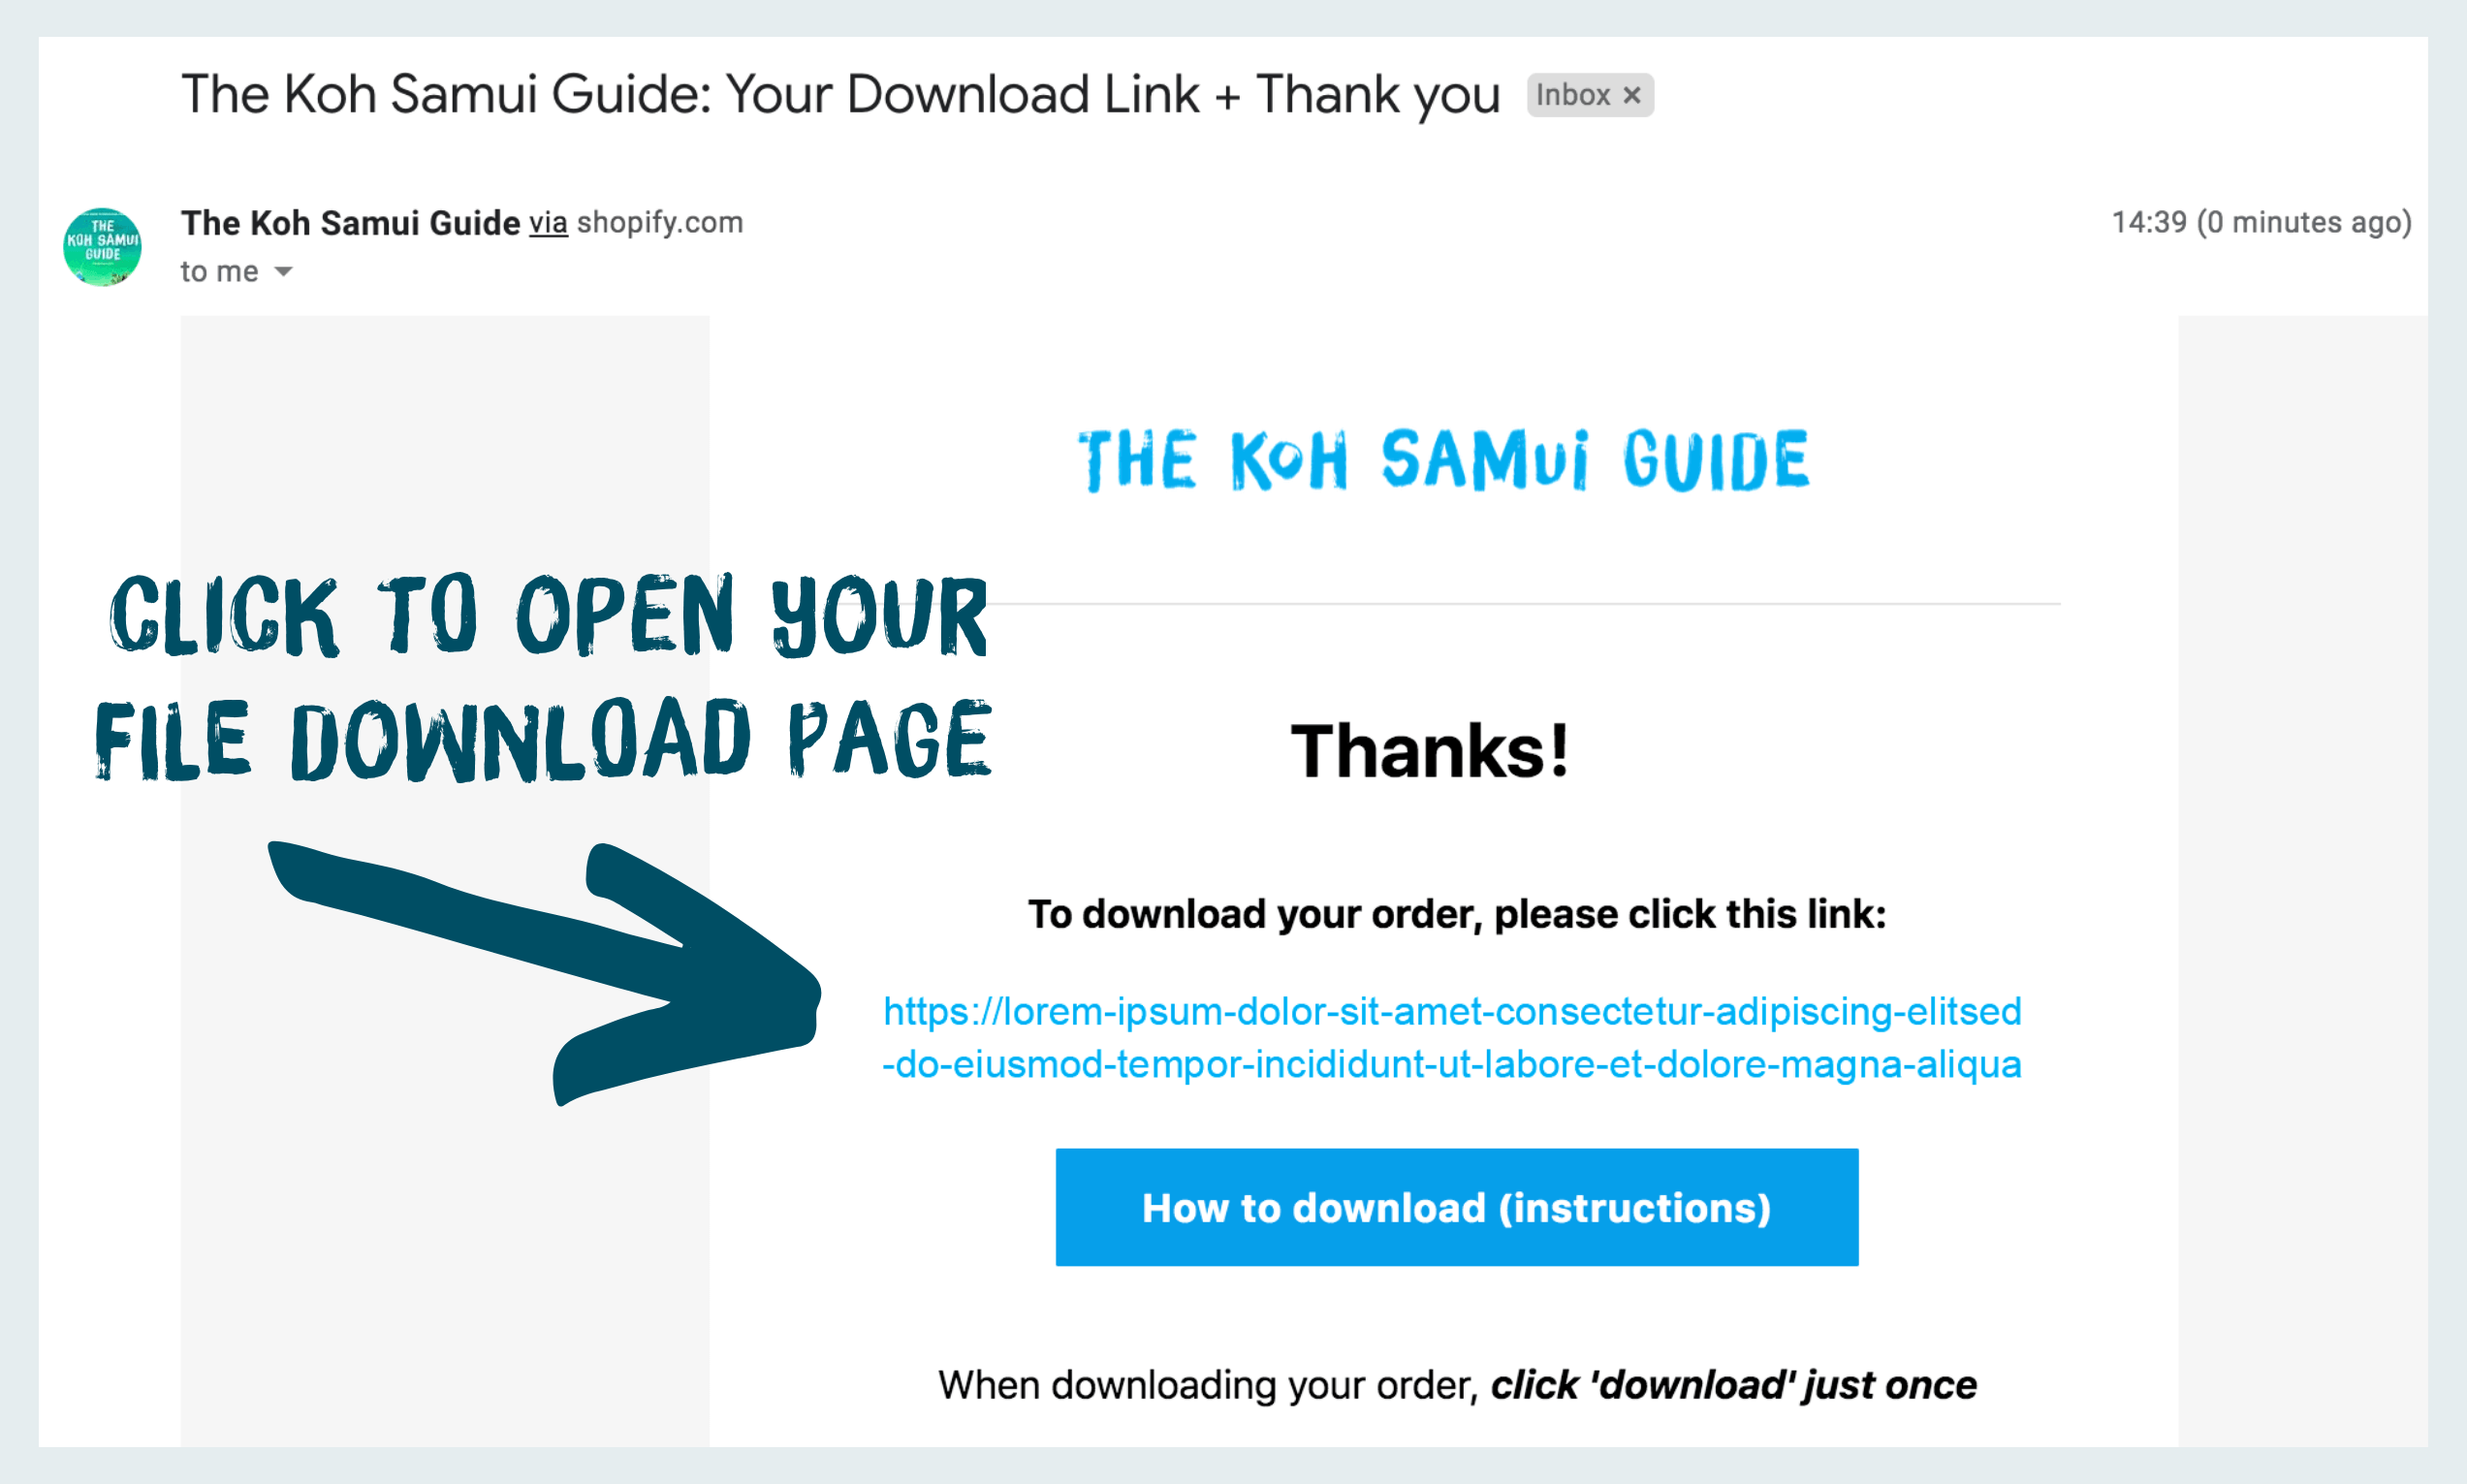 How to download The Koh Samui Guide: Your email receipt with a link